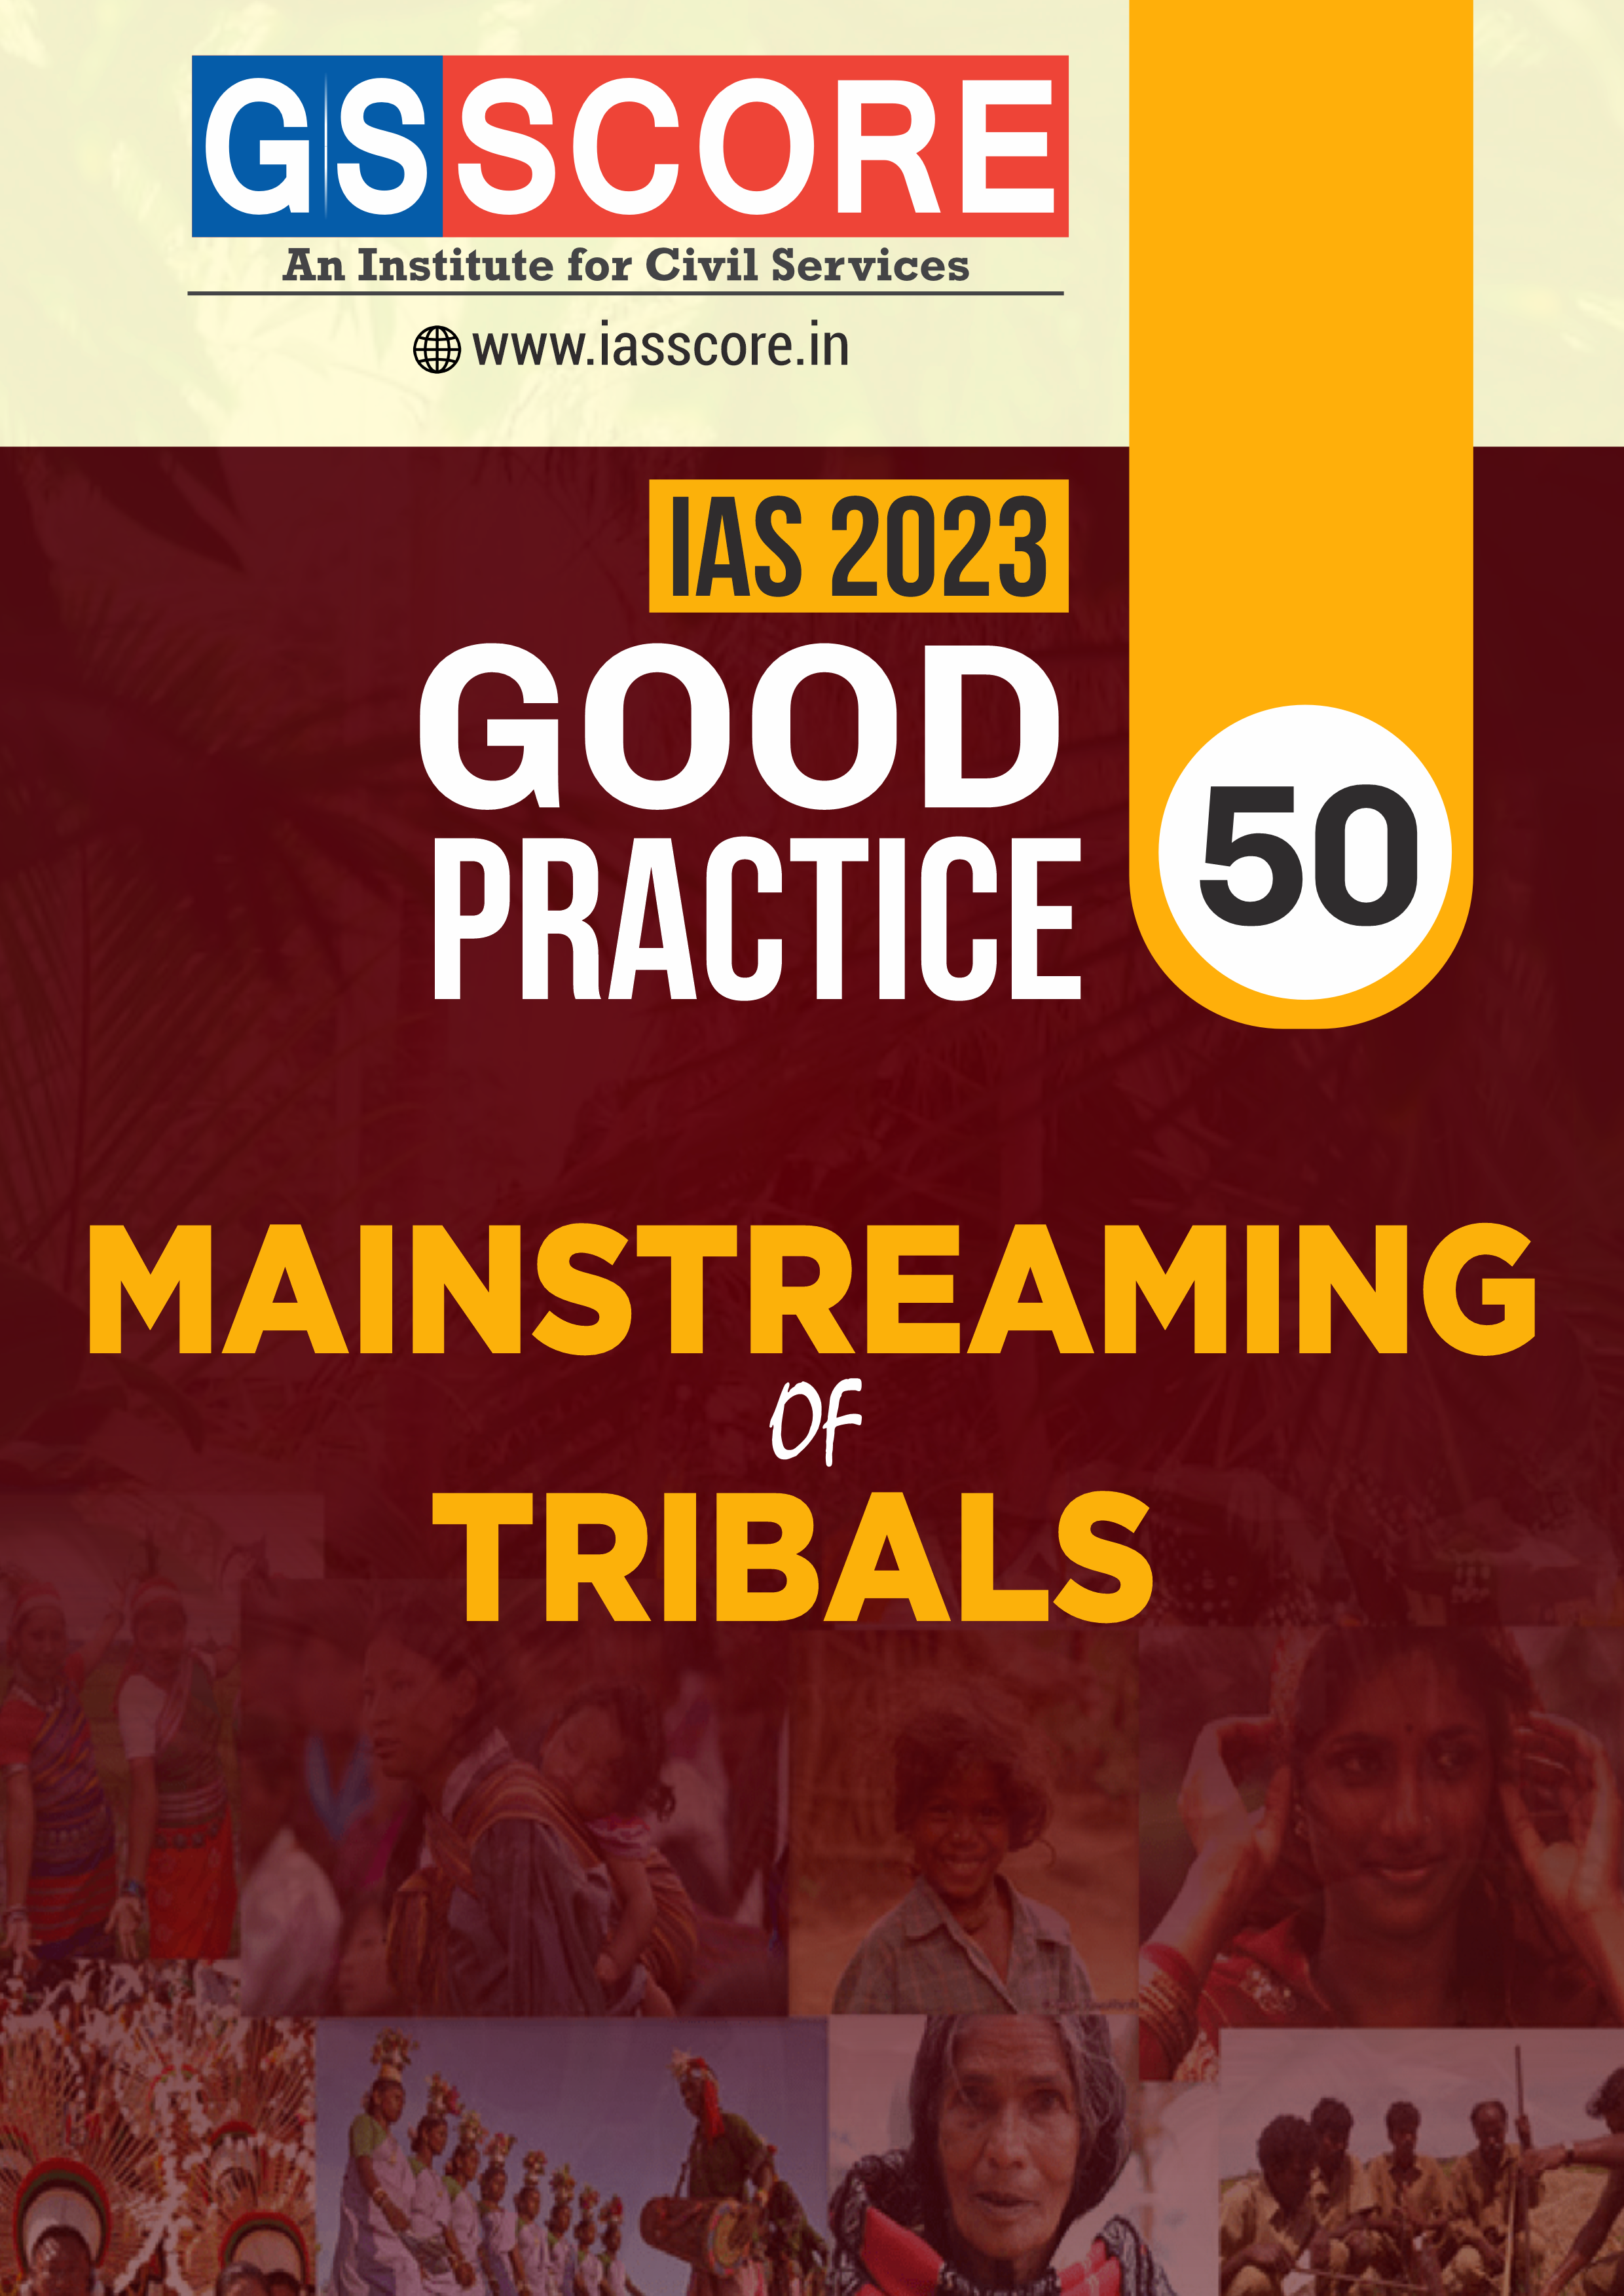 Good Practice - 'Mainstreaming of Tribal'